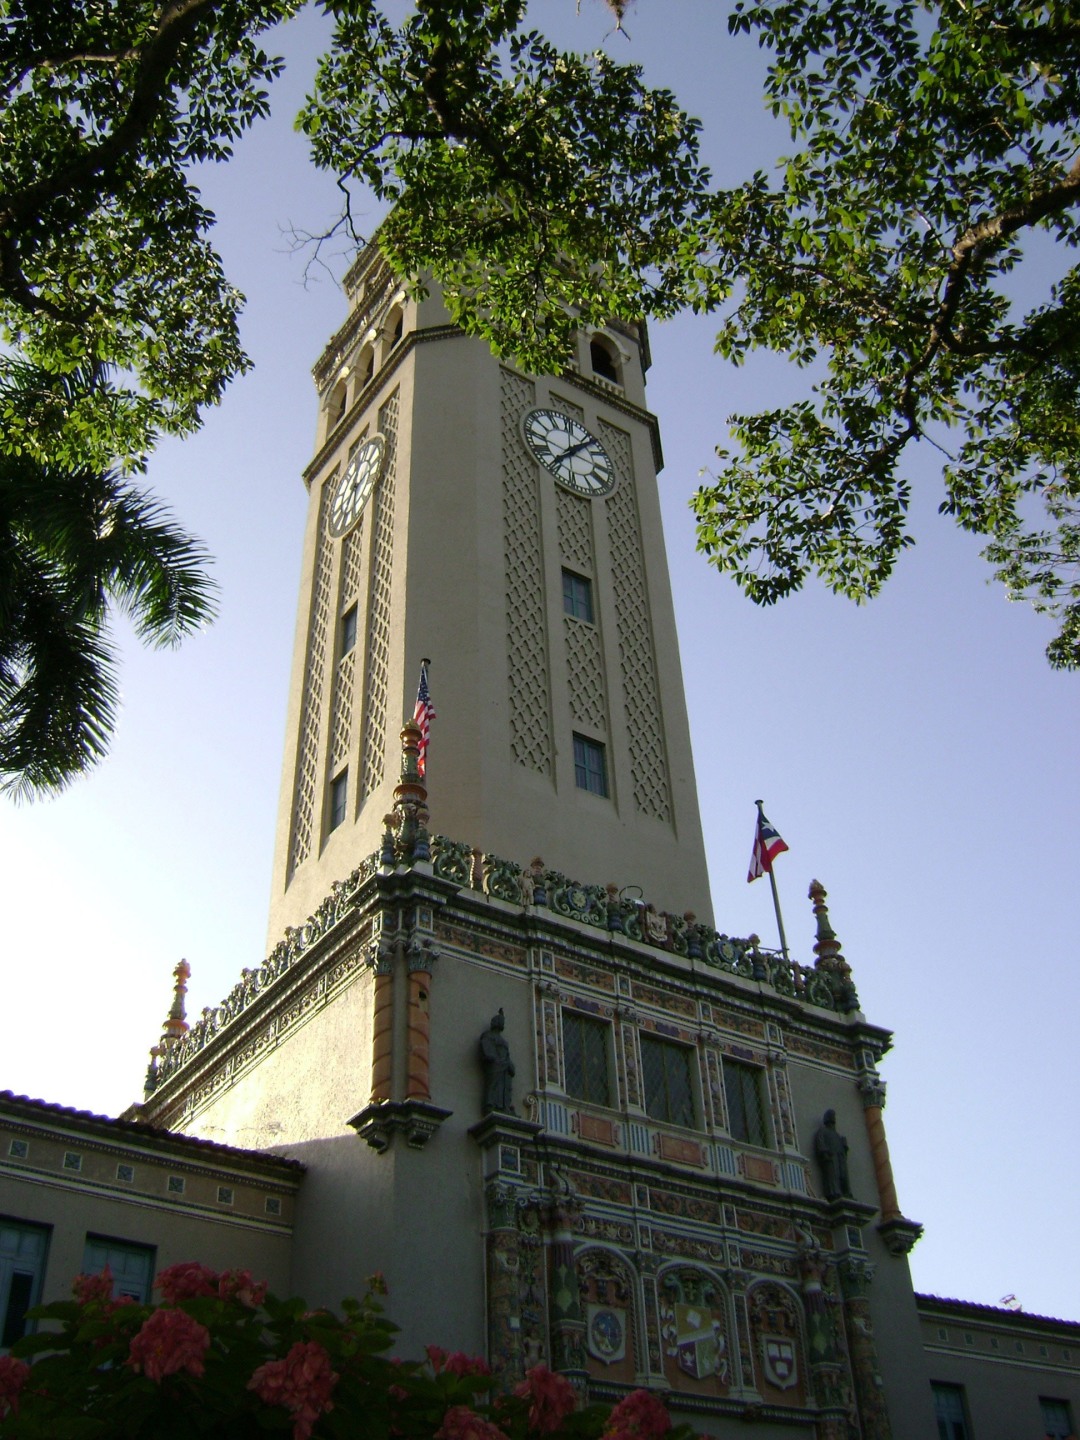 The main tower of the University of Puerto Rico in San Juan